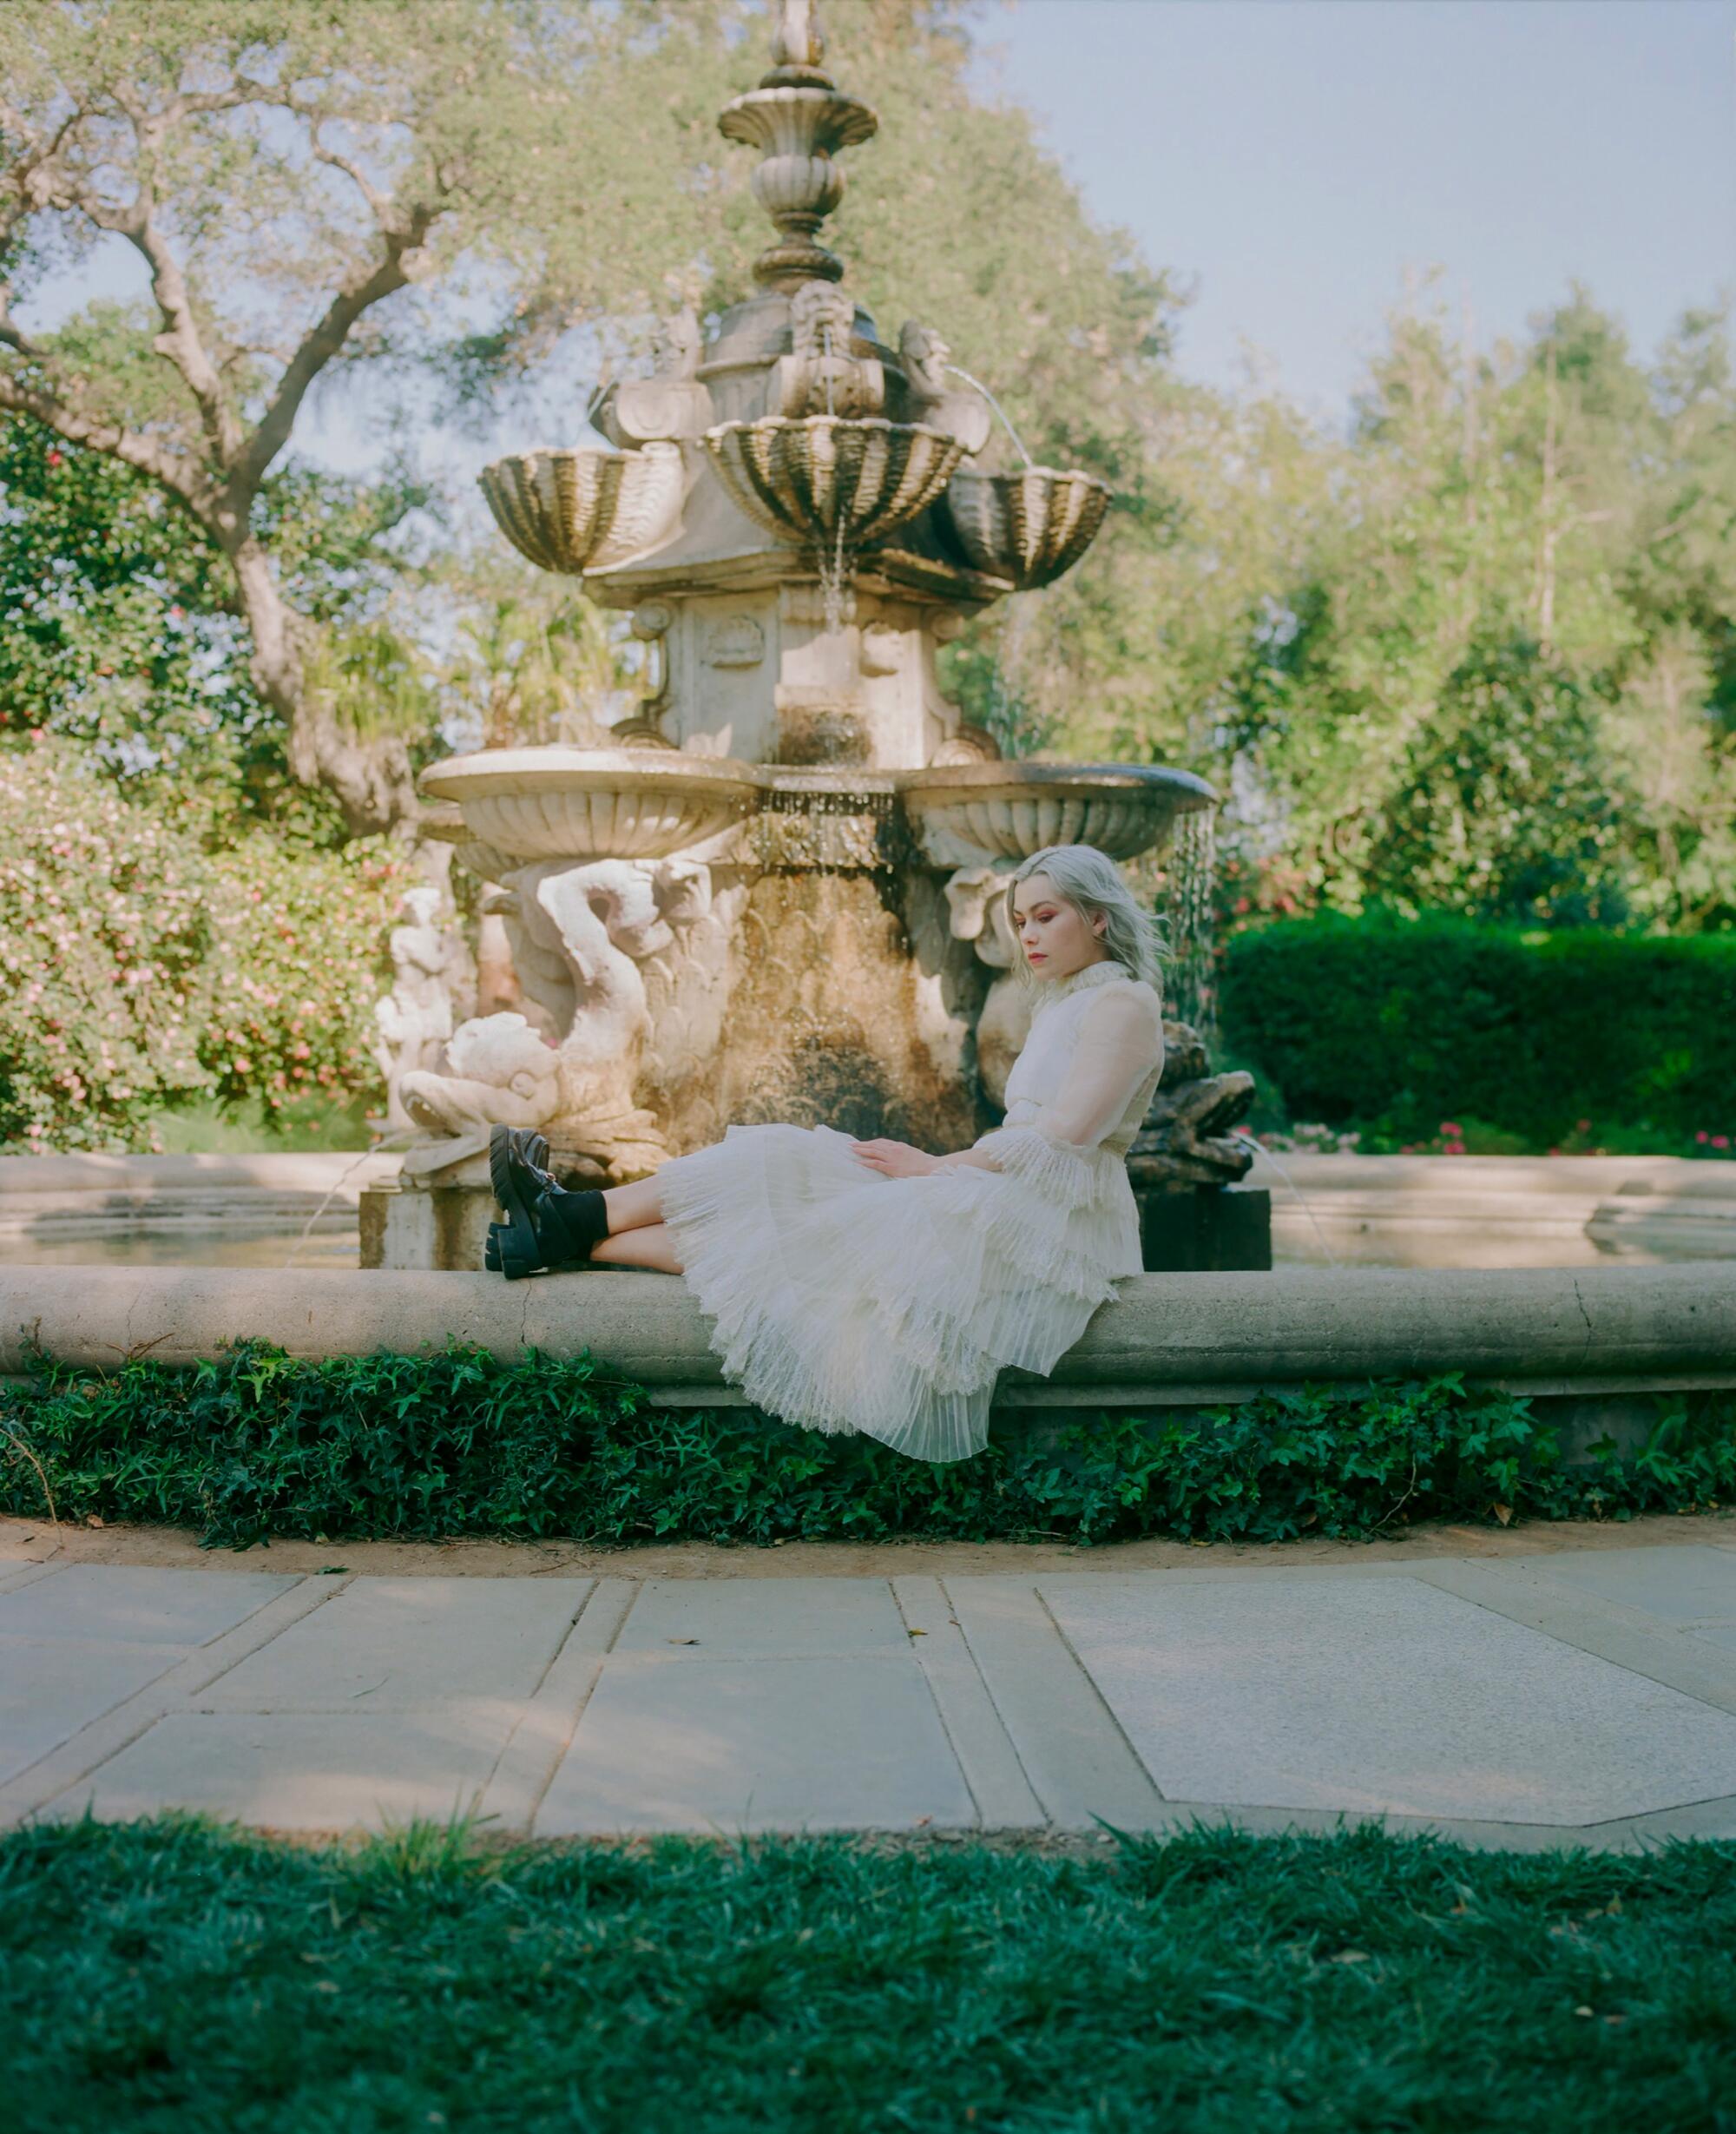 A woman in a white dress sits near a grand outdoor fountain.